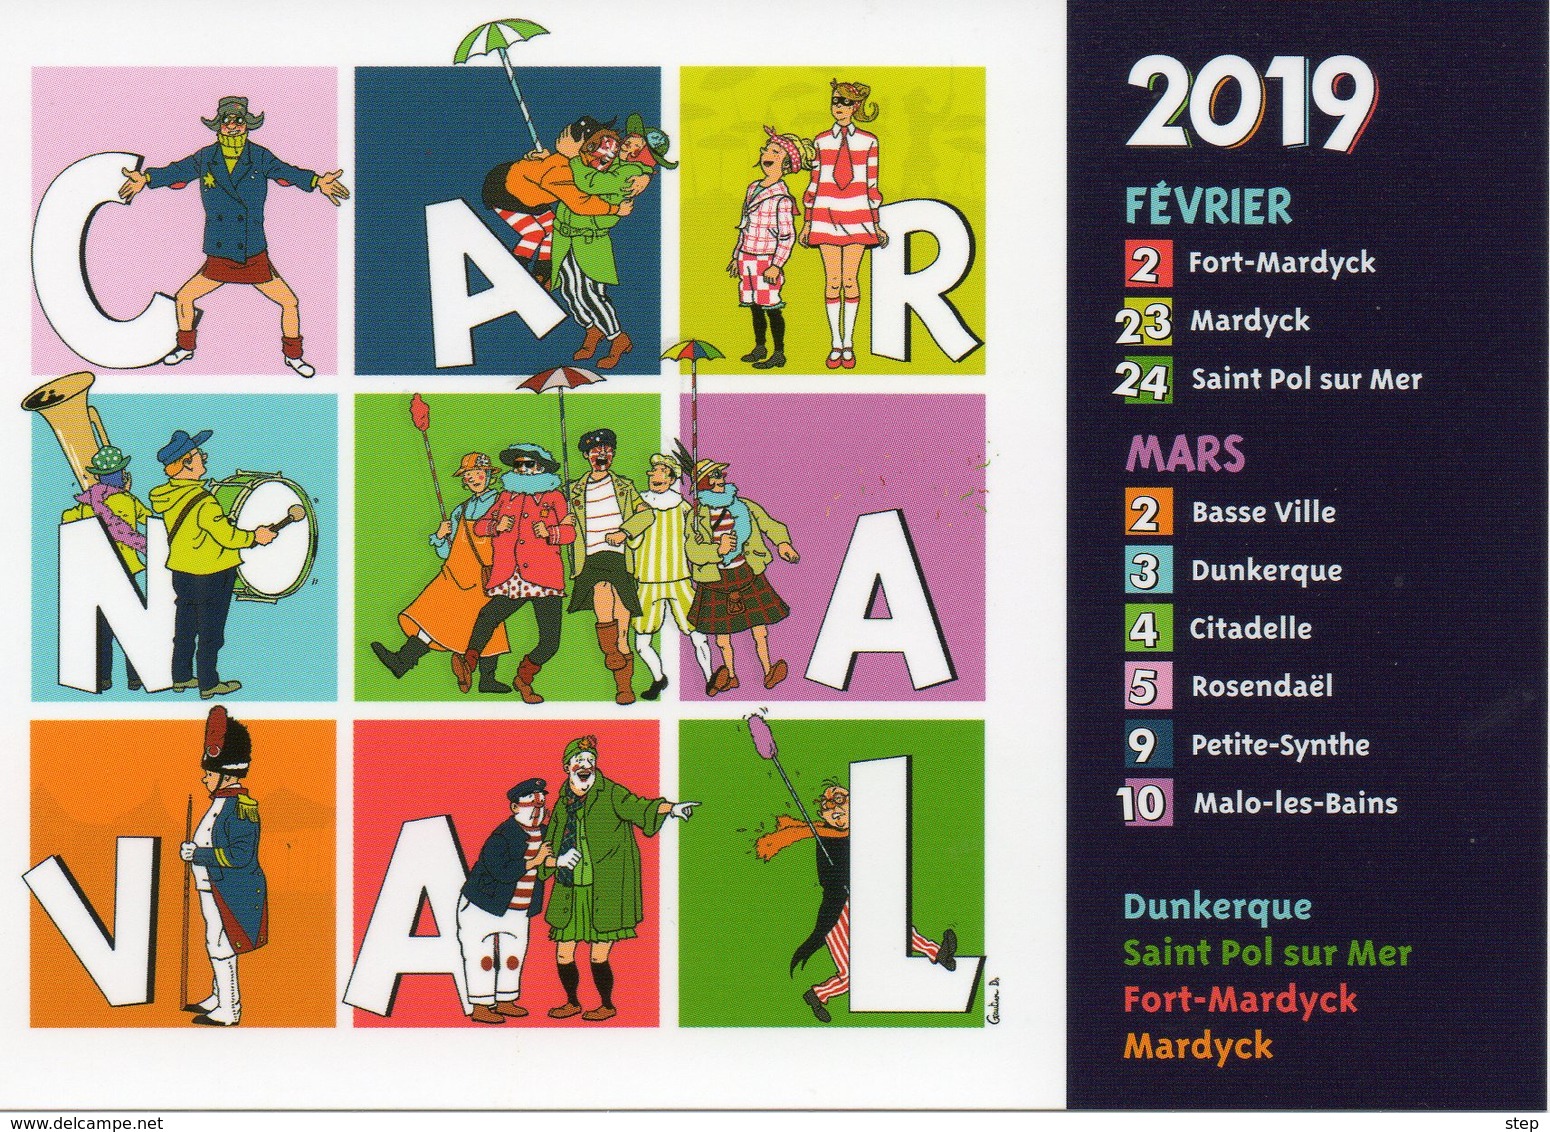 DUNKERQUE (NORD) : CARNAVAL 2019 - Carnaval